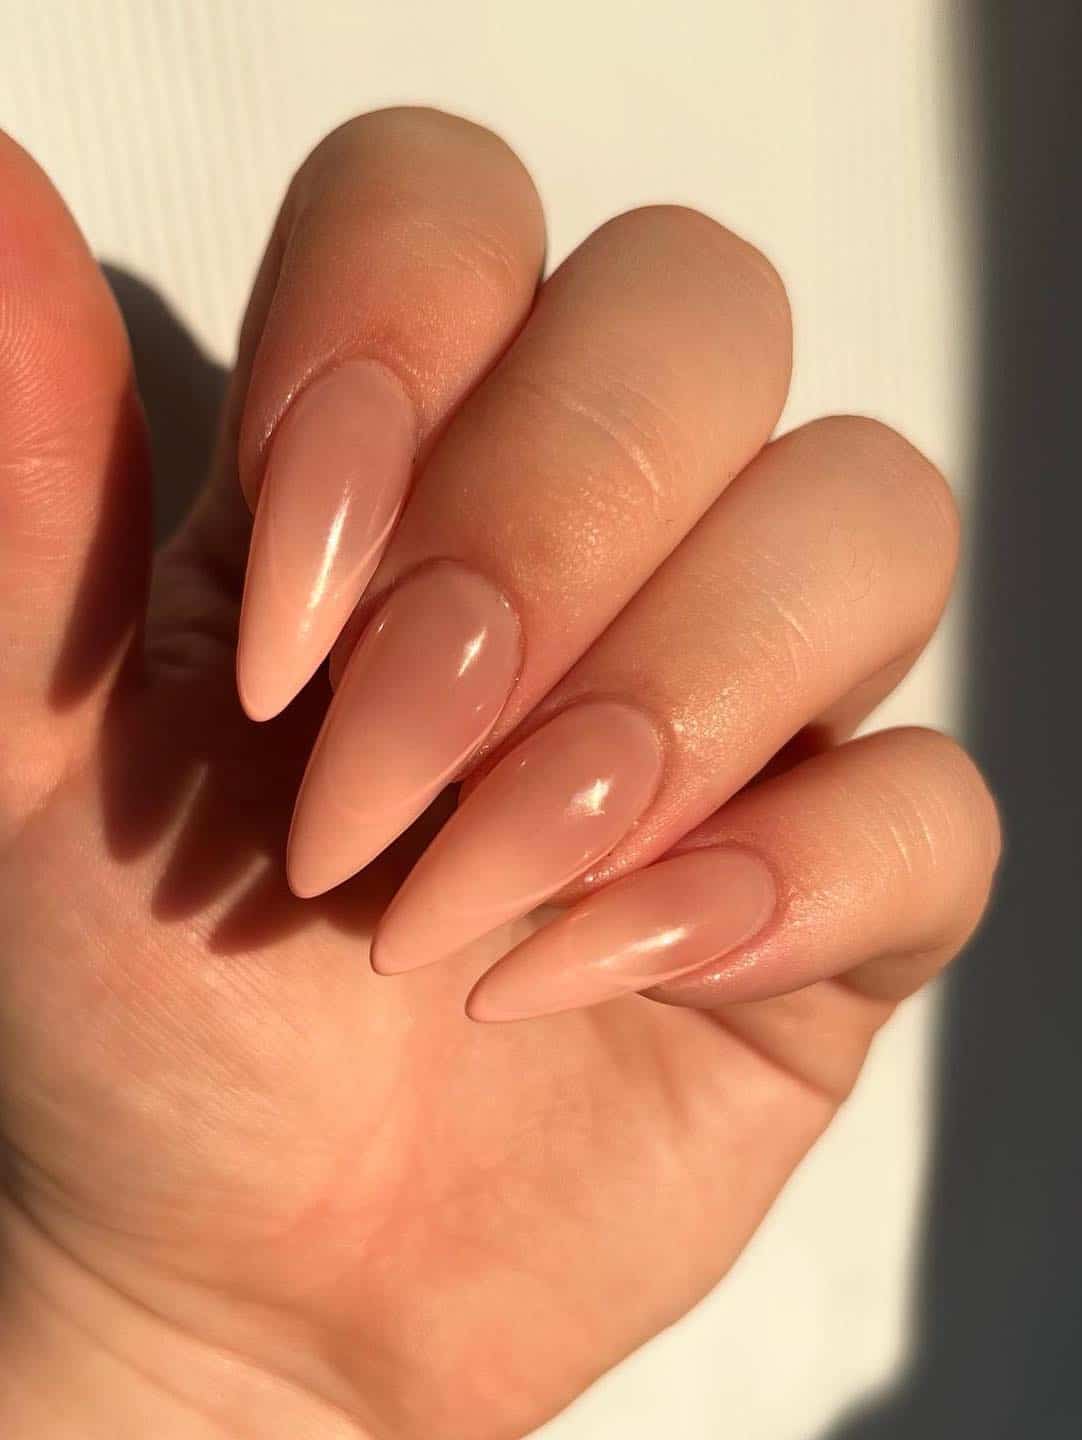 a hand with long stiletto nails painted a beige and nude ombre